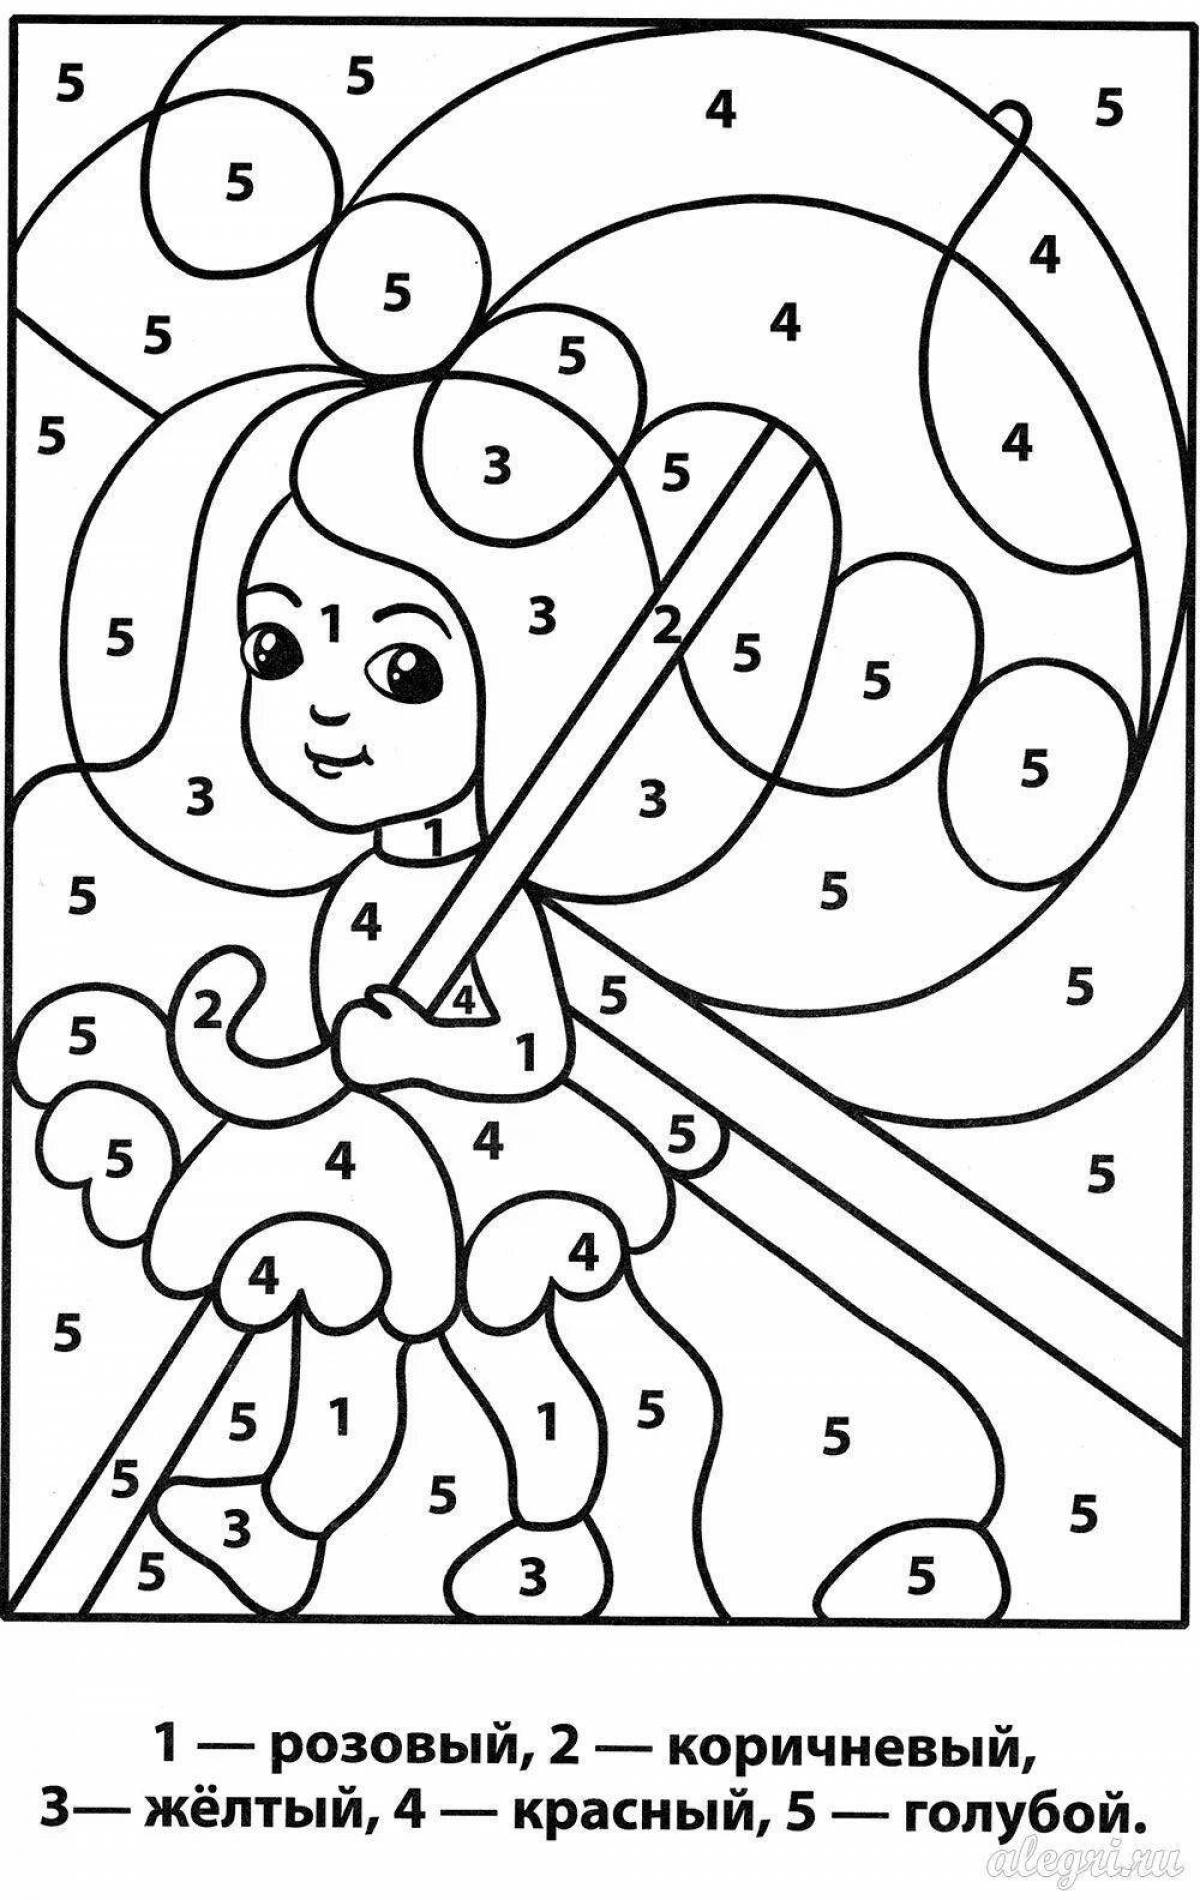 Educational coloring by numbers for 6 year olds